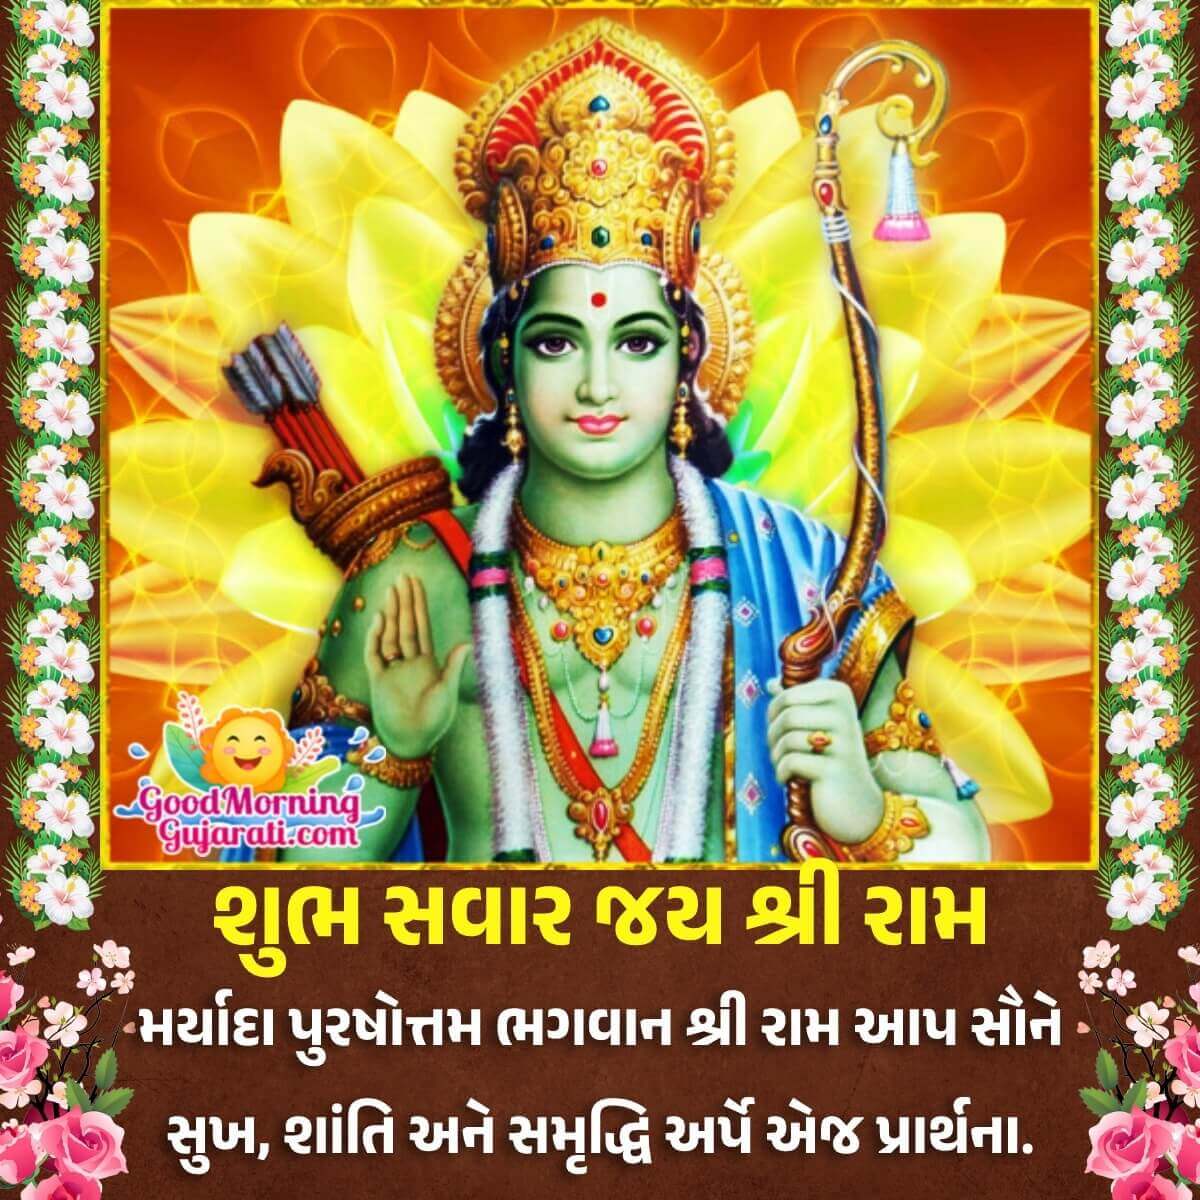 Good Morning Gujarati Religious - Good Morning Wishes & Images in ...